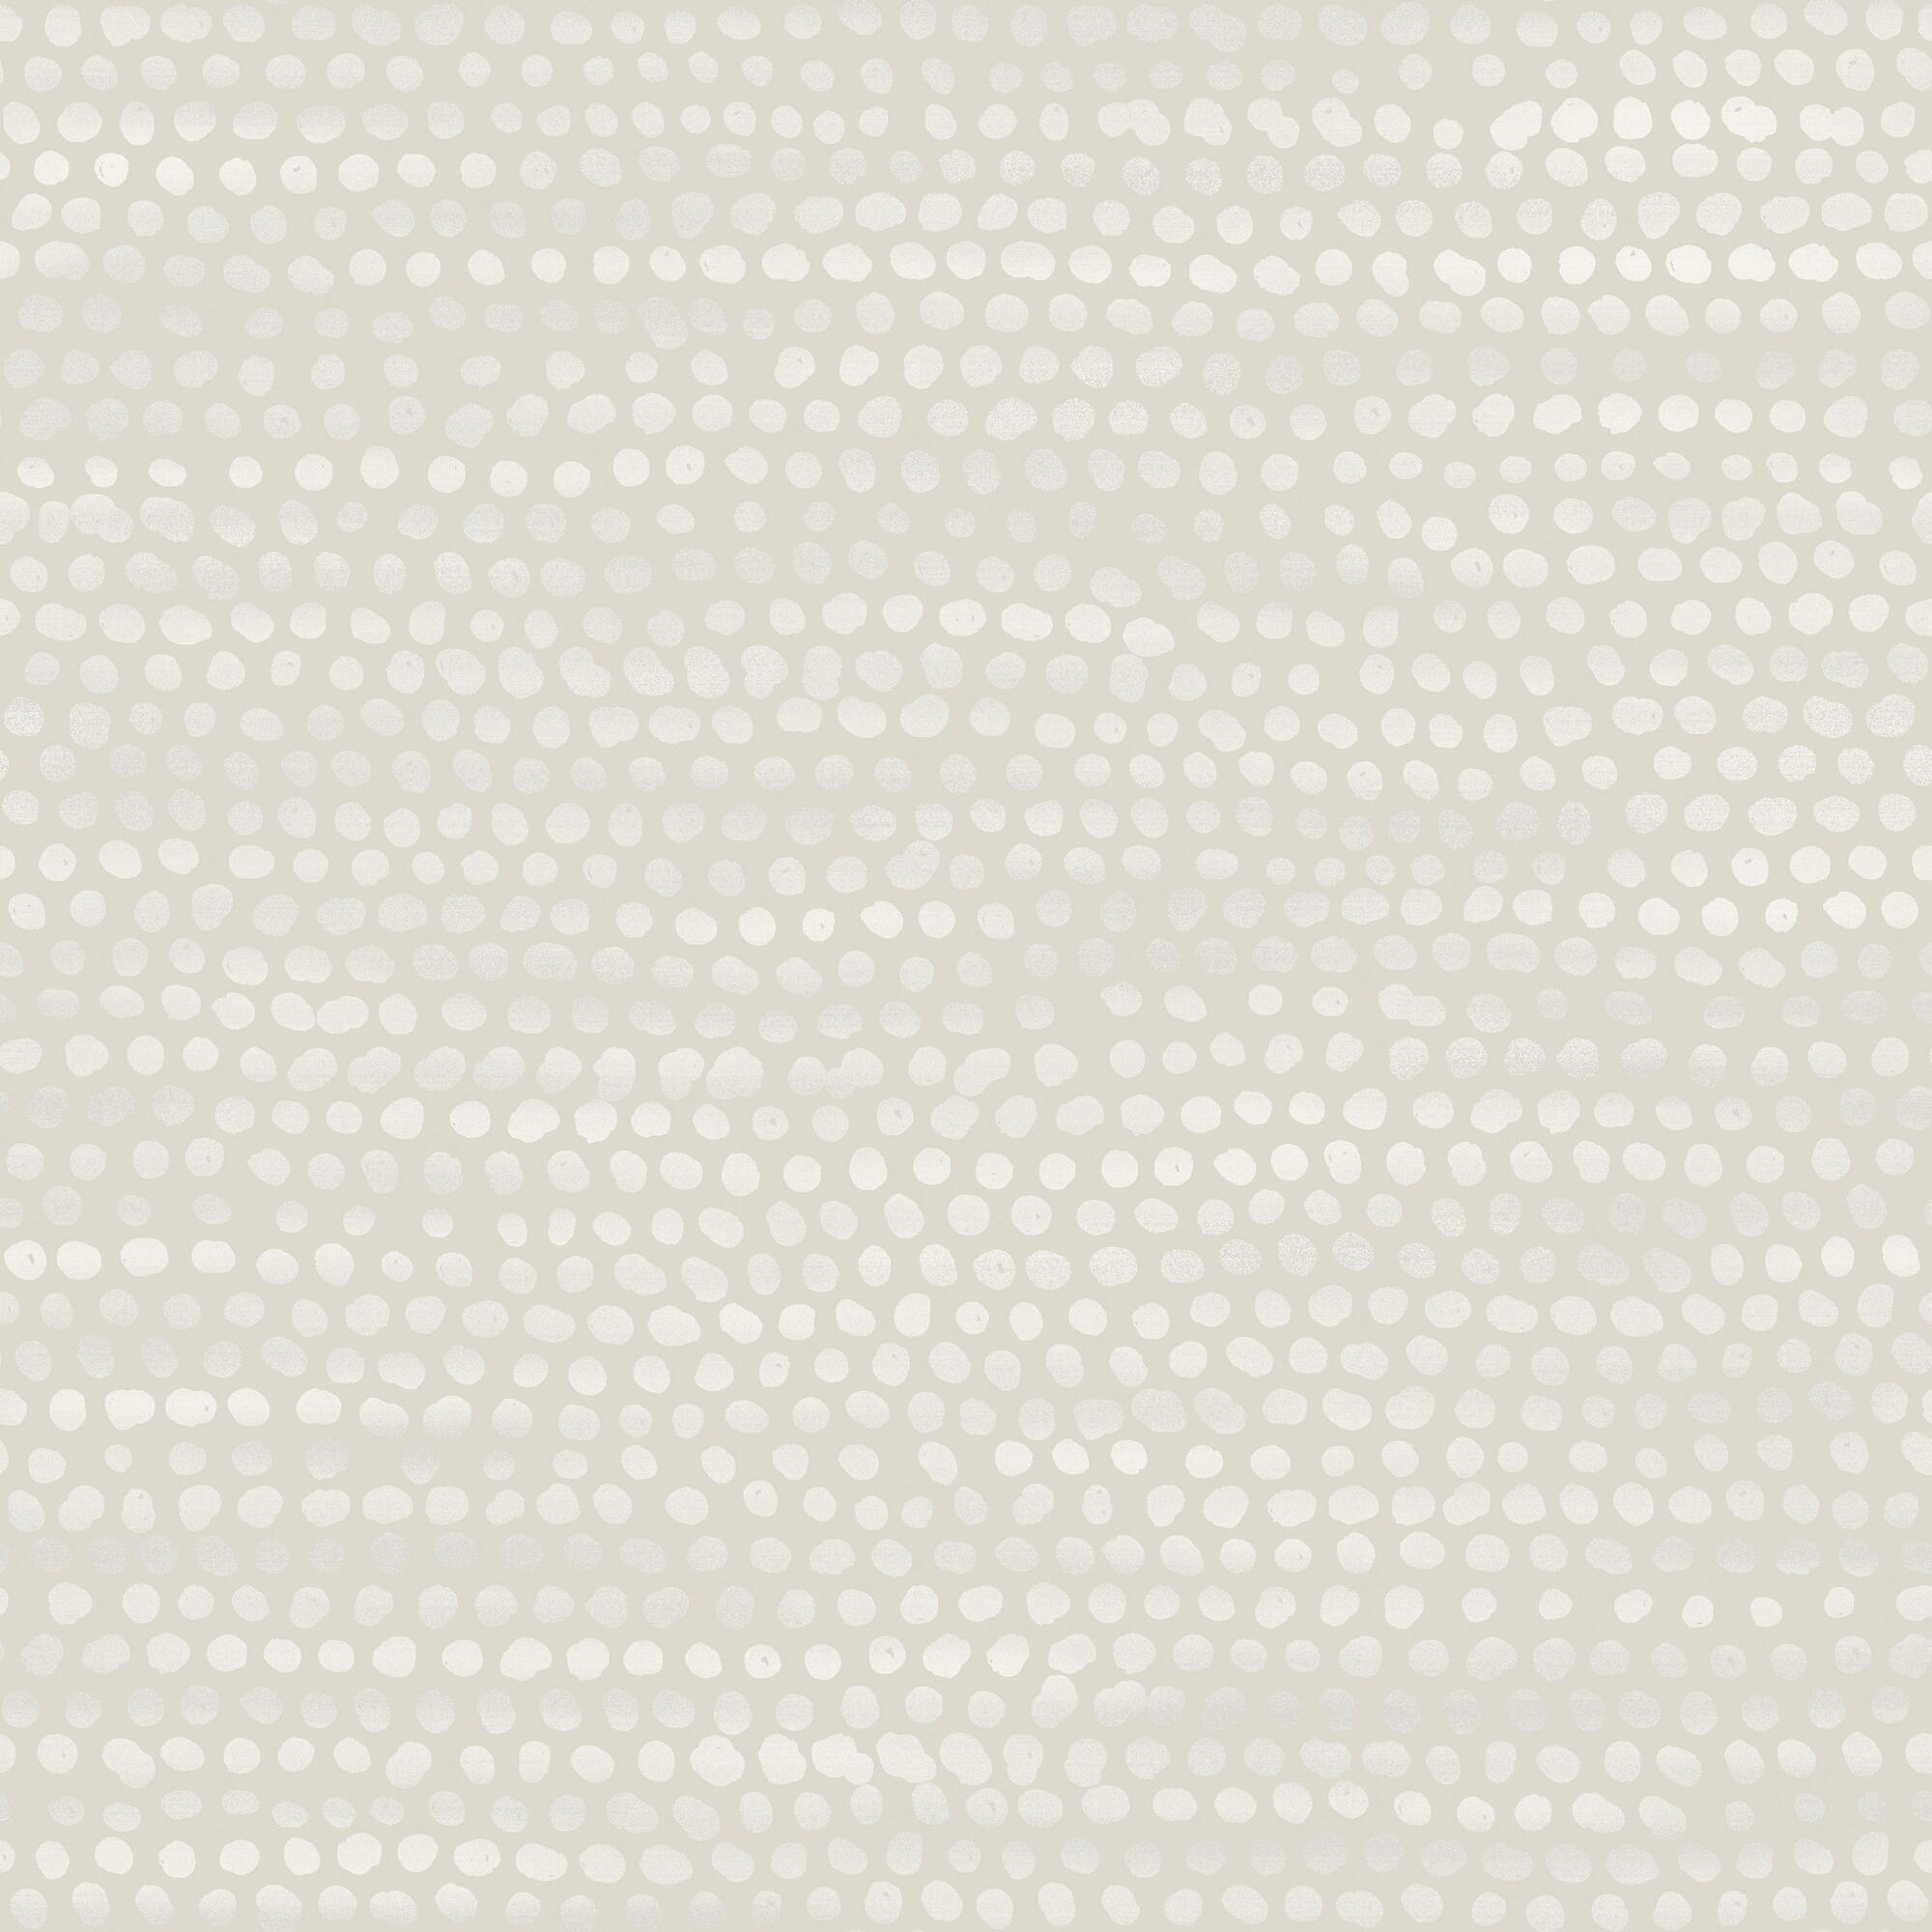 Gray Distressed Organic Dots Peel And Stick Wallpaper by World Market